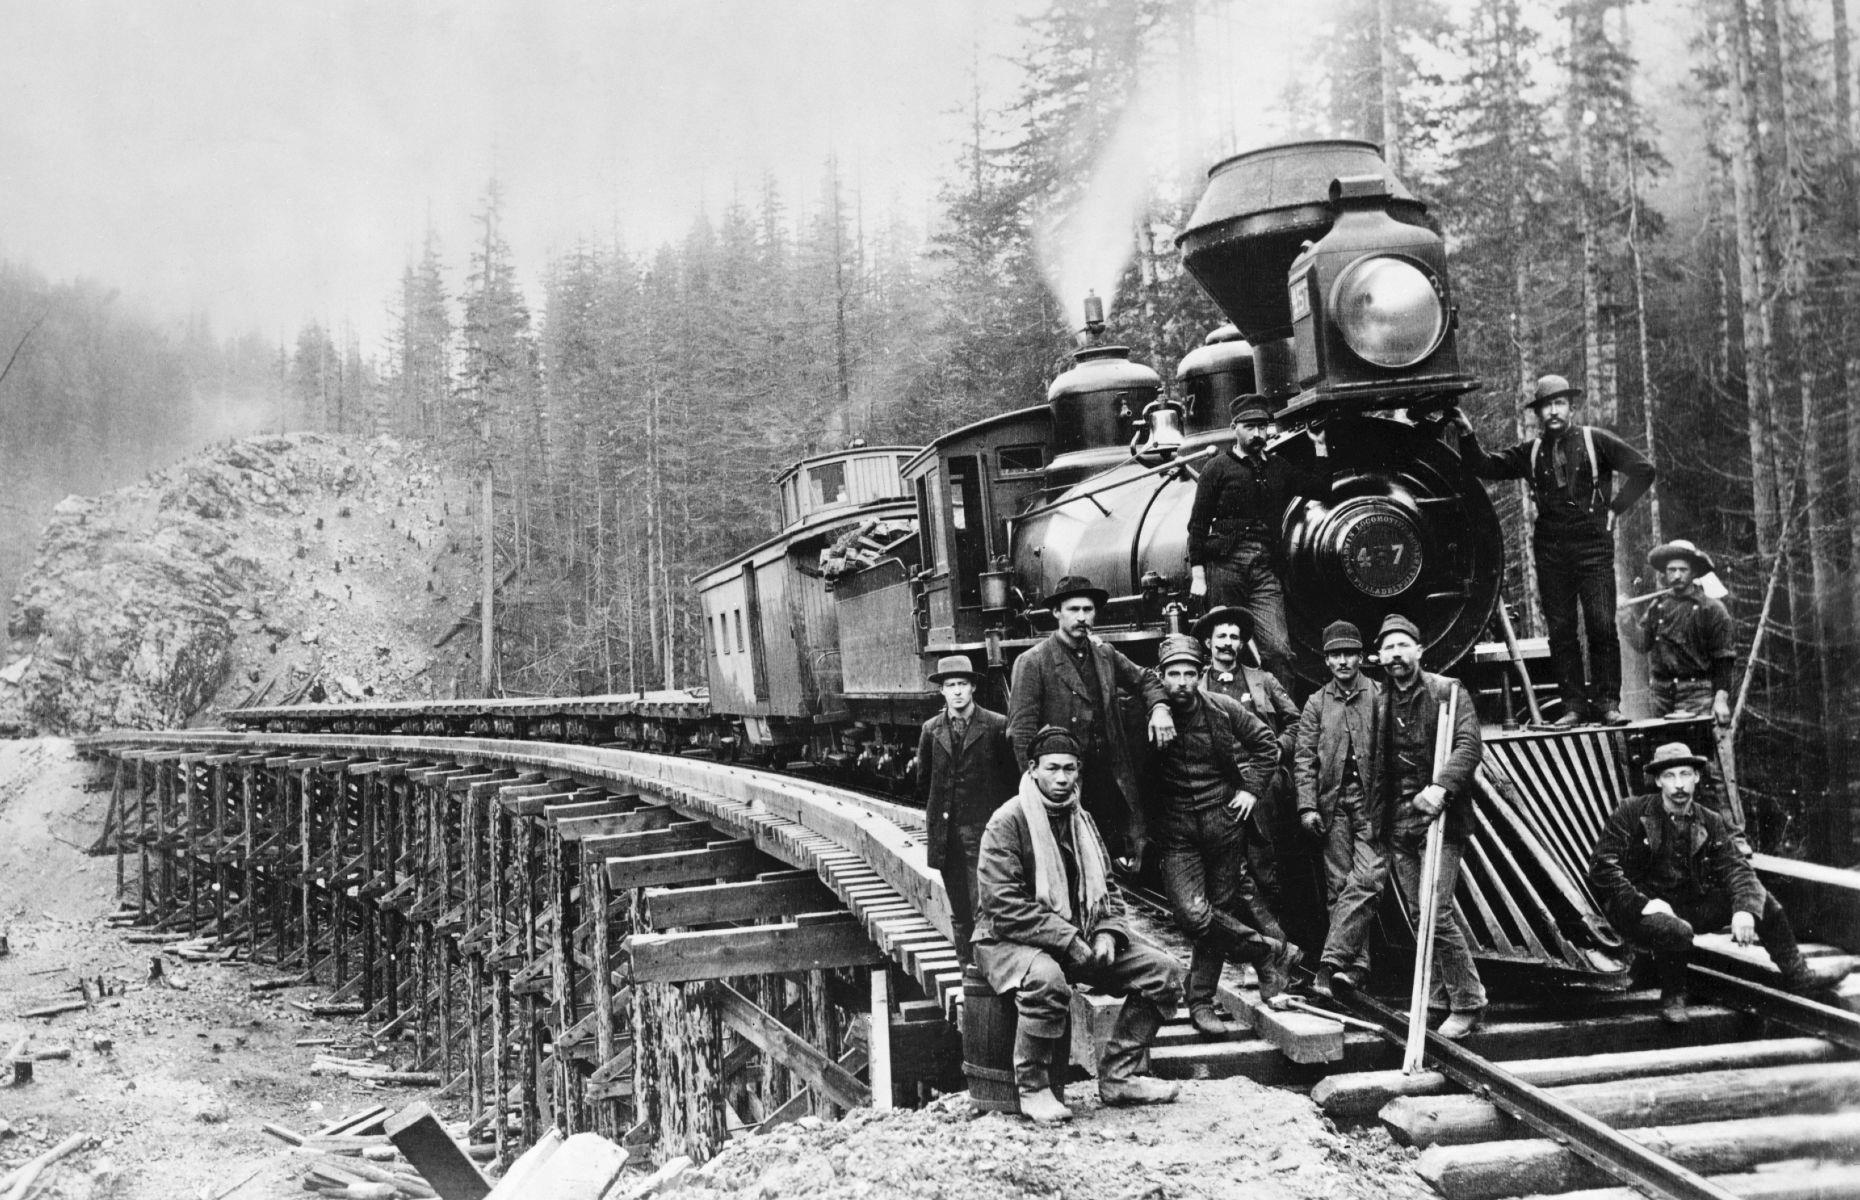 <p>By the 1880s, industrialists like Jay Gould, Cornelius Vanderbilt and JP Morgan made fortunes by sinking vast sums of money into railroads and slowly gaining a monopoly on rail travel. Small, regional lines were consolidated into giant rail empires headed by men whose astonishing wealth and sometimes-questionable business practices meant they became known as 'robber barons.' Lines continued to expand as money was pumped into new track and infrastructure, like the new bridge crossing over the Green River in Washington, pictured here in 1885.</p>